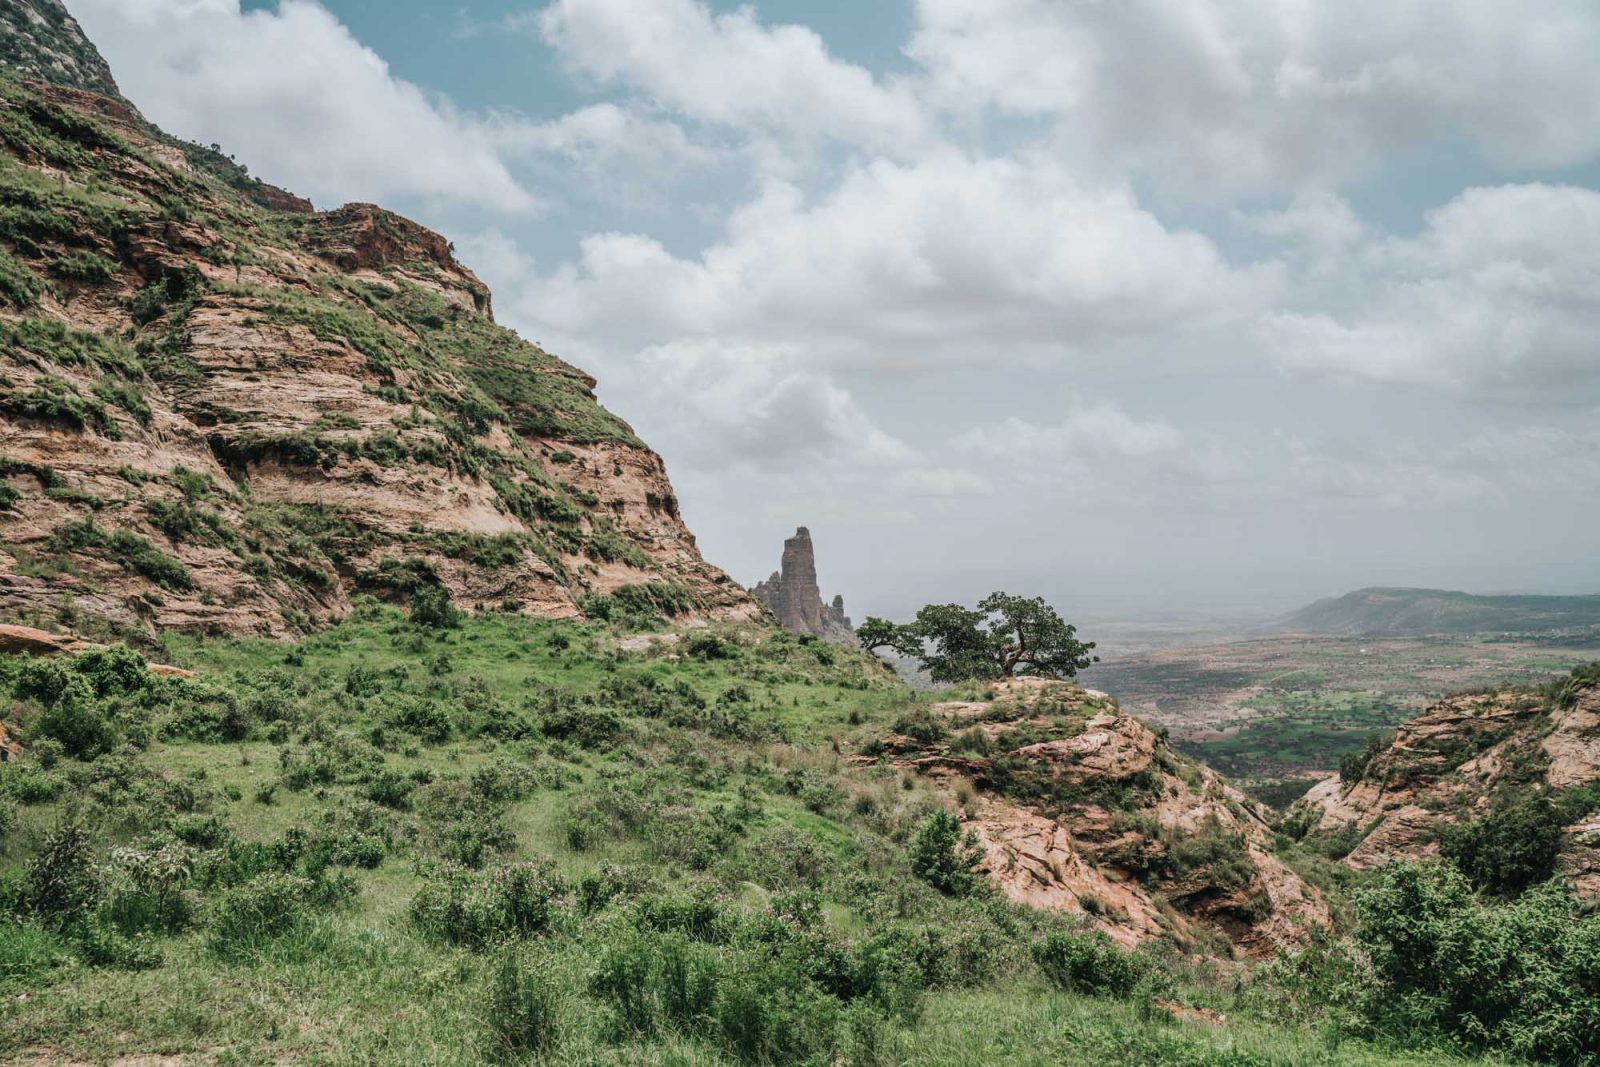 The Ultimate Ethiopia Tour: Suggested List of Top Things to do in Ethiopia